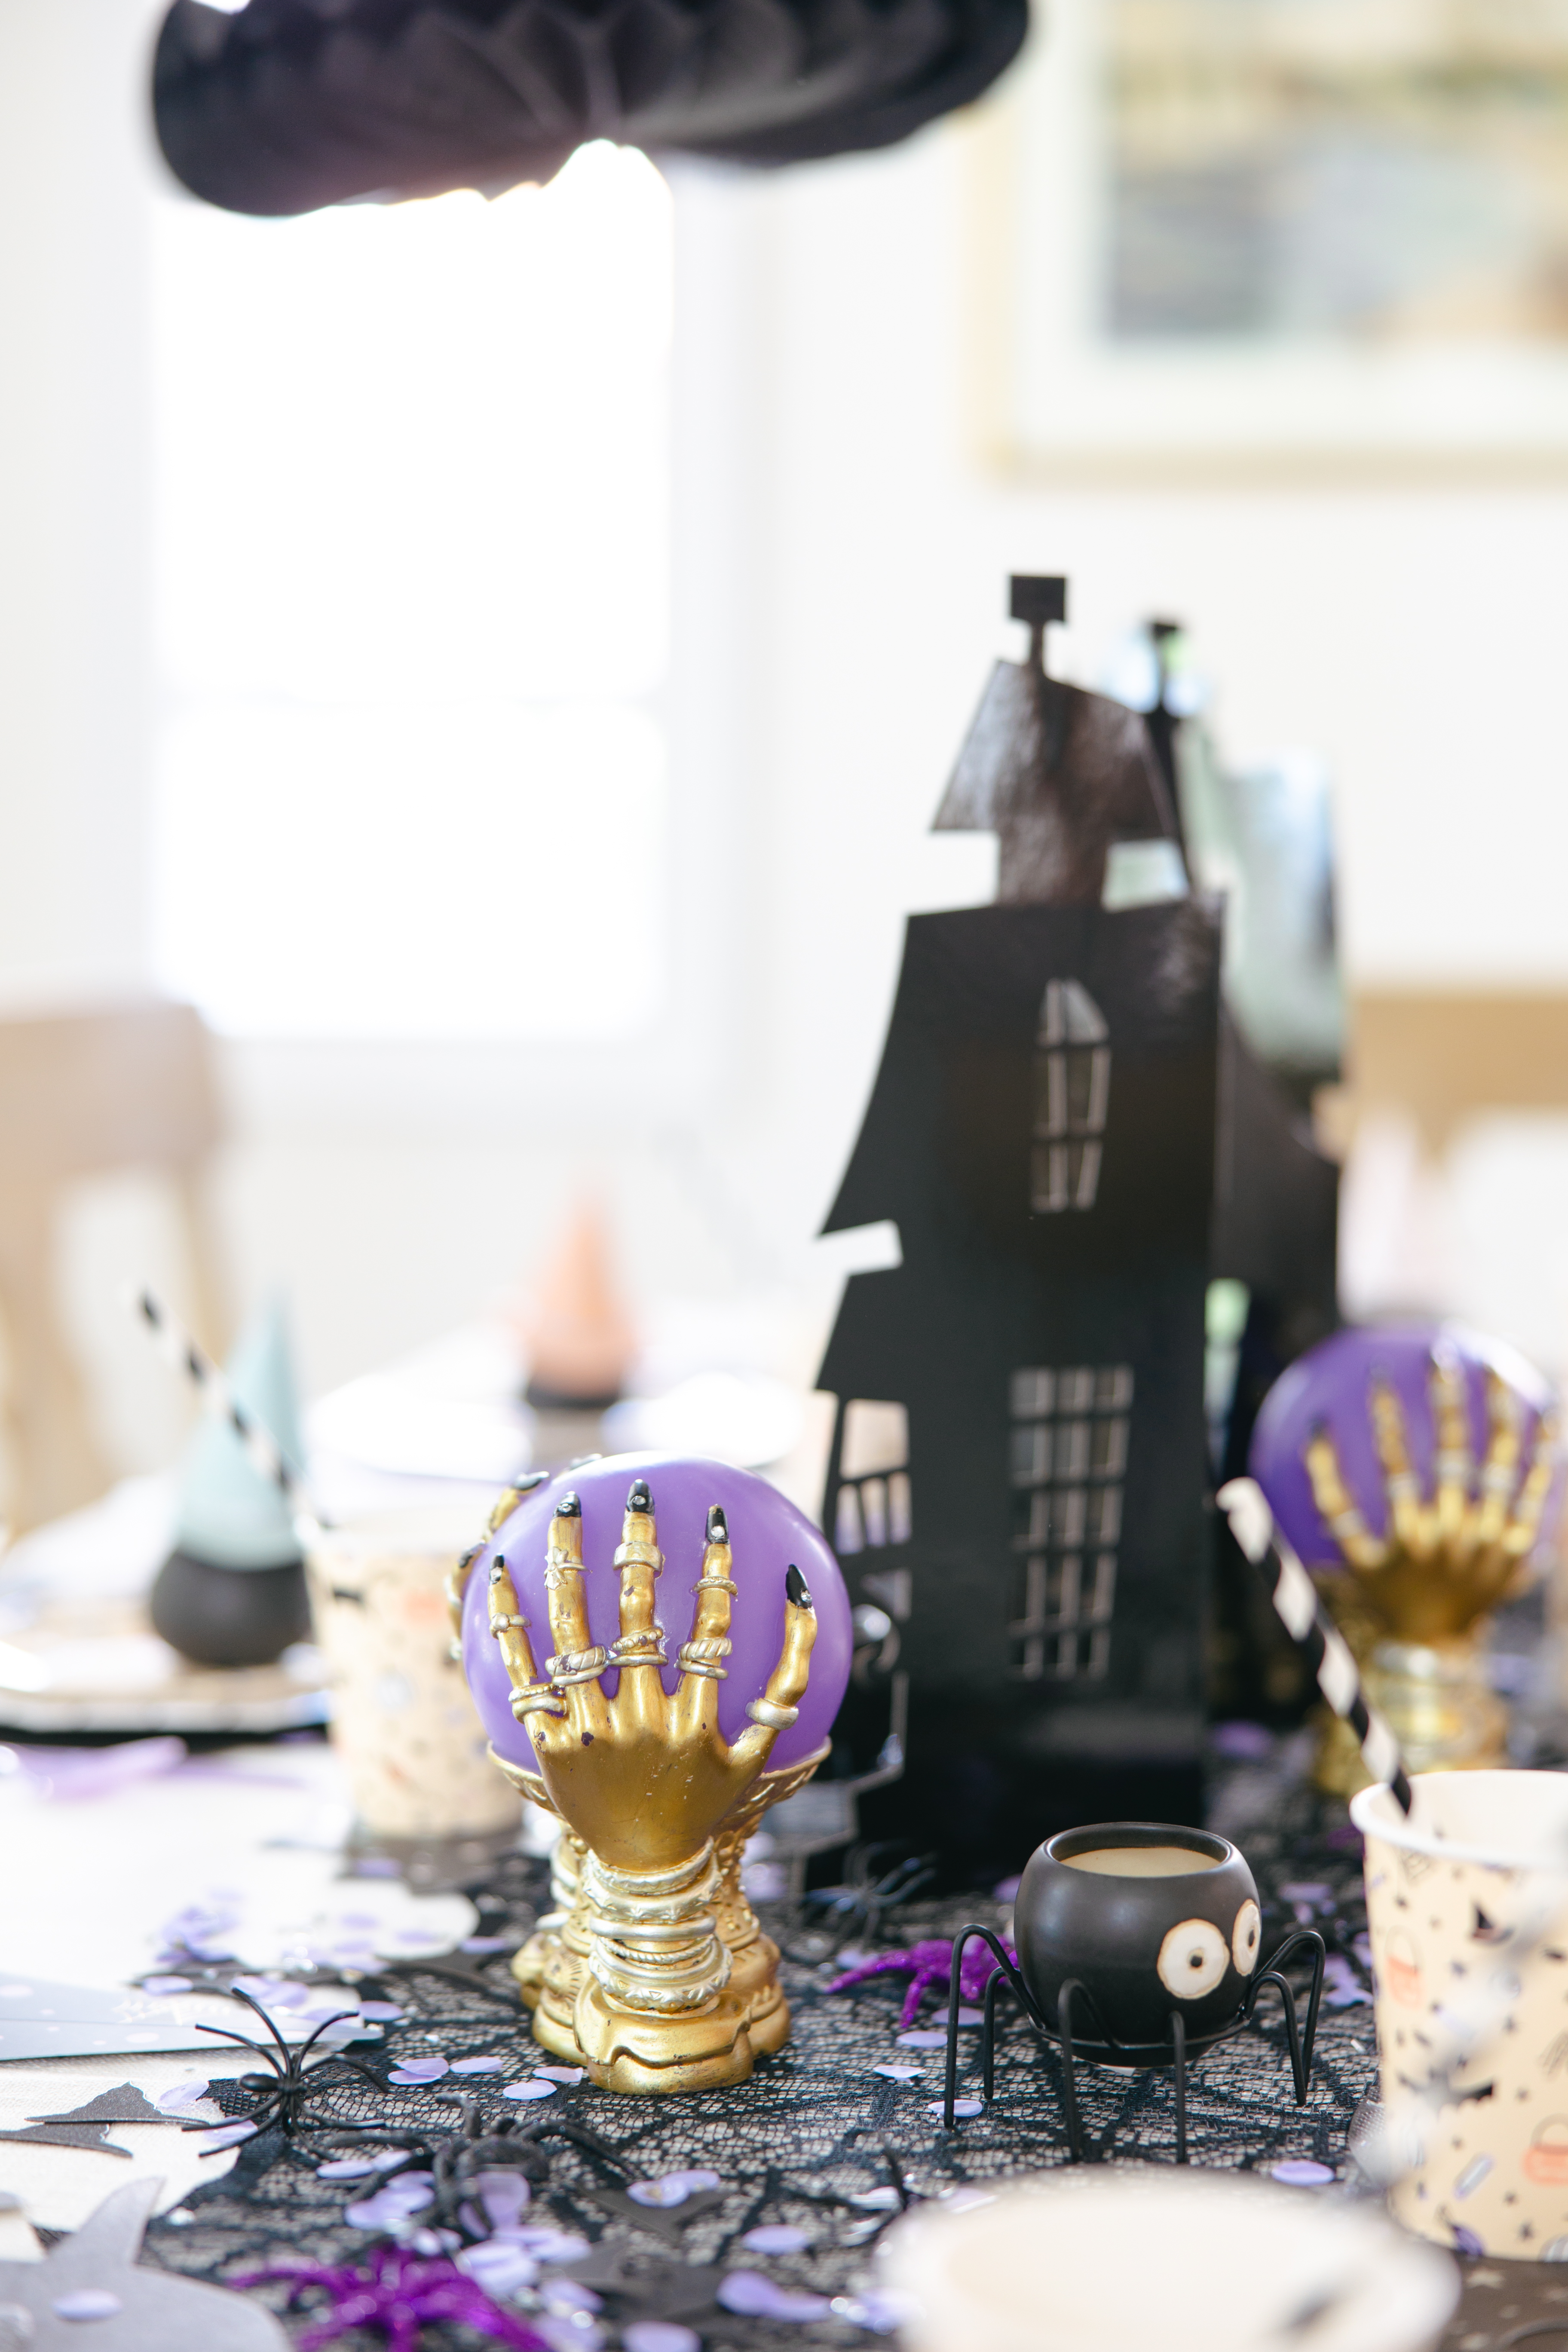 Table centerpiece with cutout black haunted house paper stand and purple and gold crystal balls from Homegoods.
